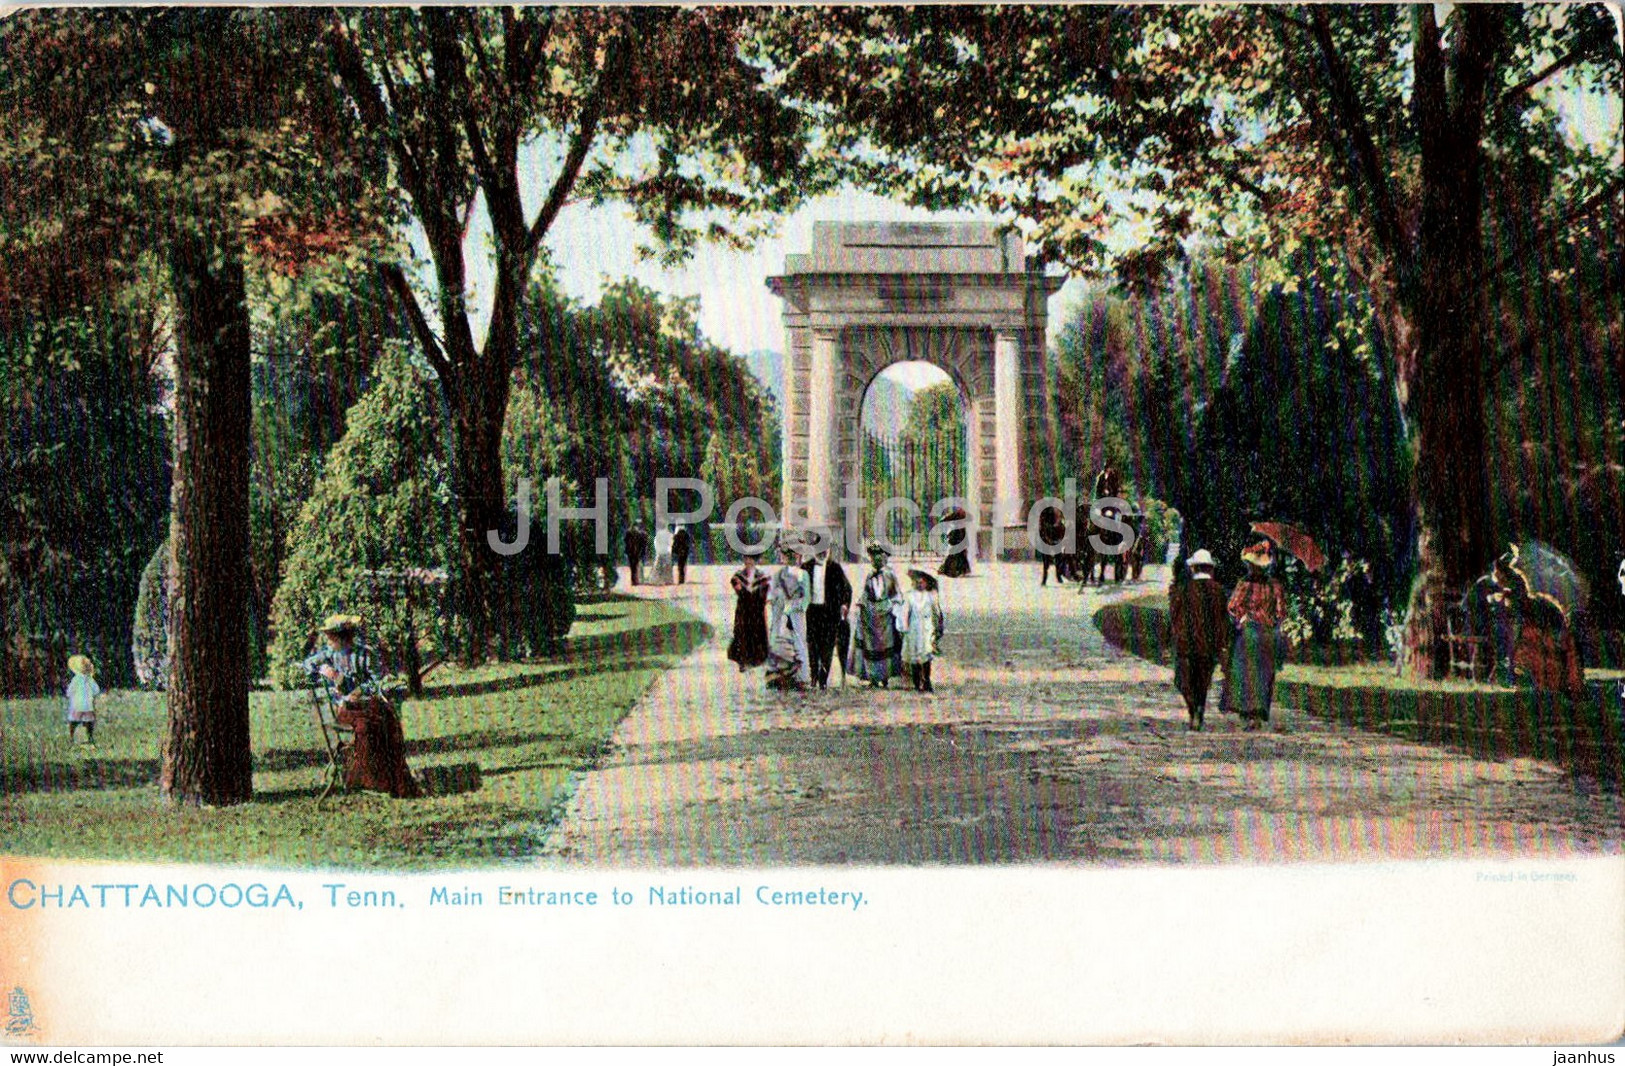 Chattanooga - Main Entrance To To National Cemetery - Tenn. - 2176 - Old Postcard - USA - Unused - Chattanooga